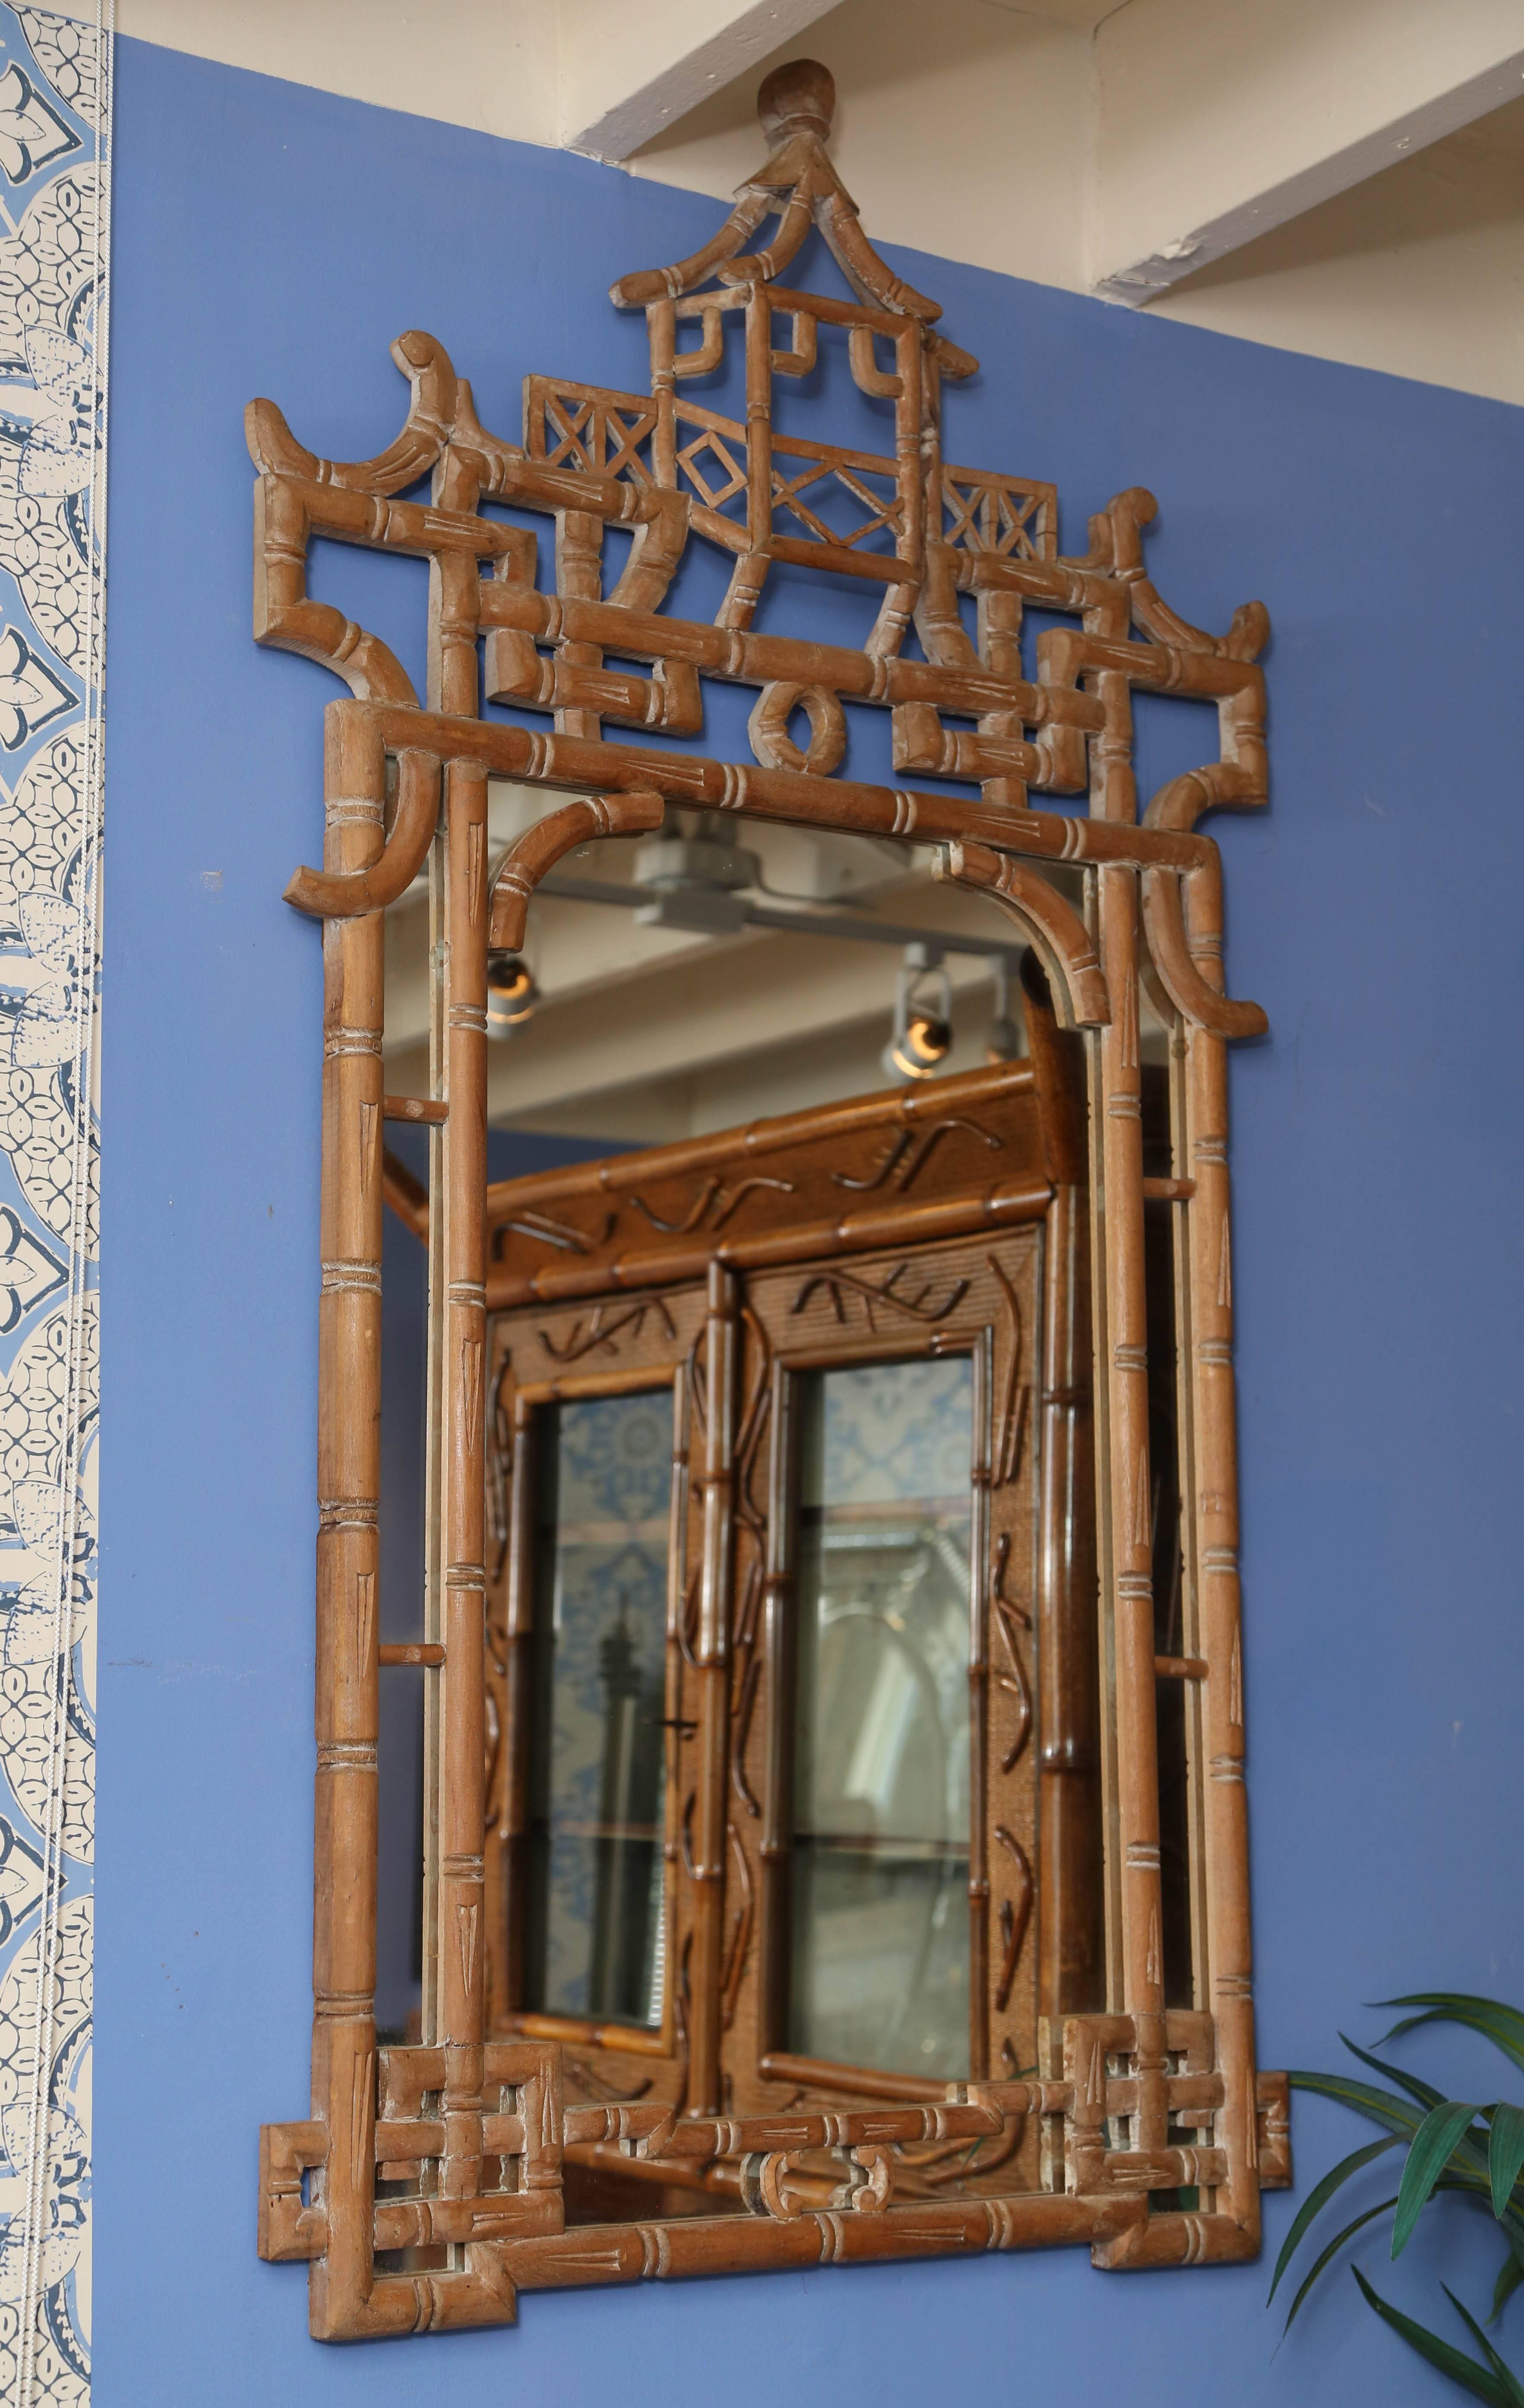 
American, late 20th century. A Hollywood Regency Chinese Chippendale style pickled mirror, having faux bamboo pickled wood frame topped with a pierced pagoda crest with decorative fretwork. Measures: 53", width 29", depth 2".